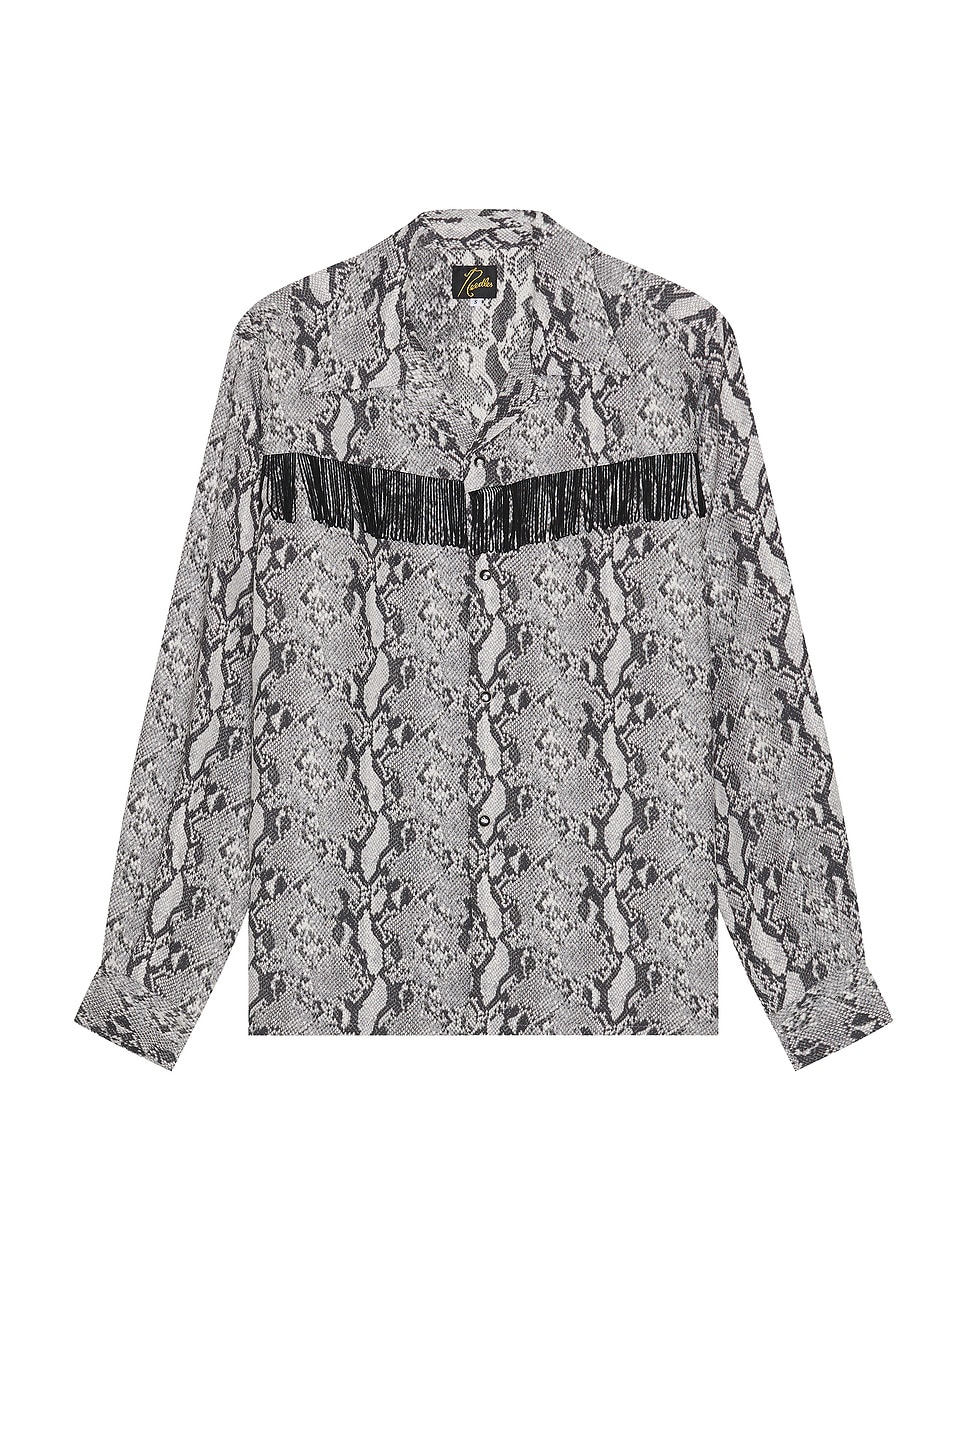 Image 1 of Needles Fringe One Up Shirt Python In Charcoal in Charcoal